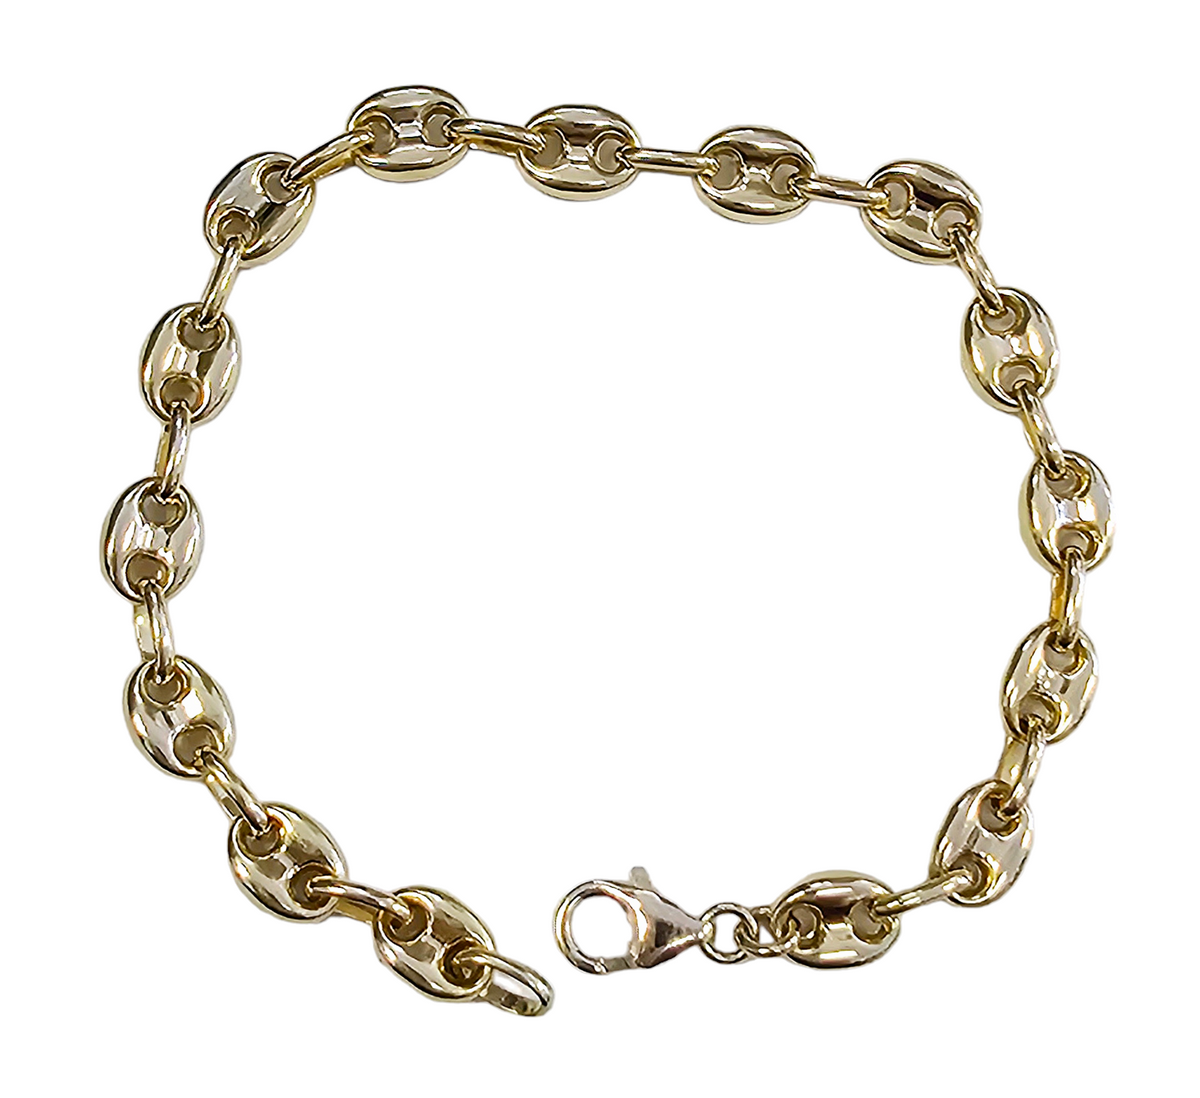 Gucci Style Link 7.62 mm Hollow Bracelet made in 14-Karat Yellow Gold 8.5 inches